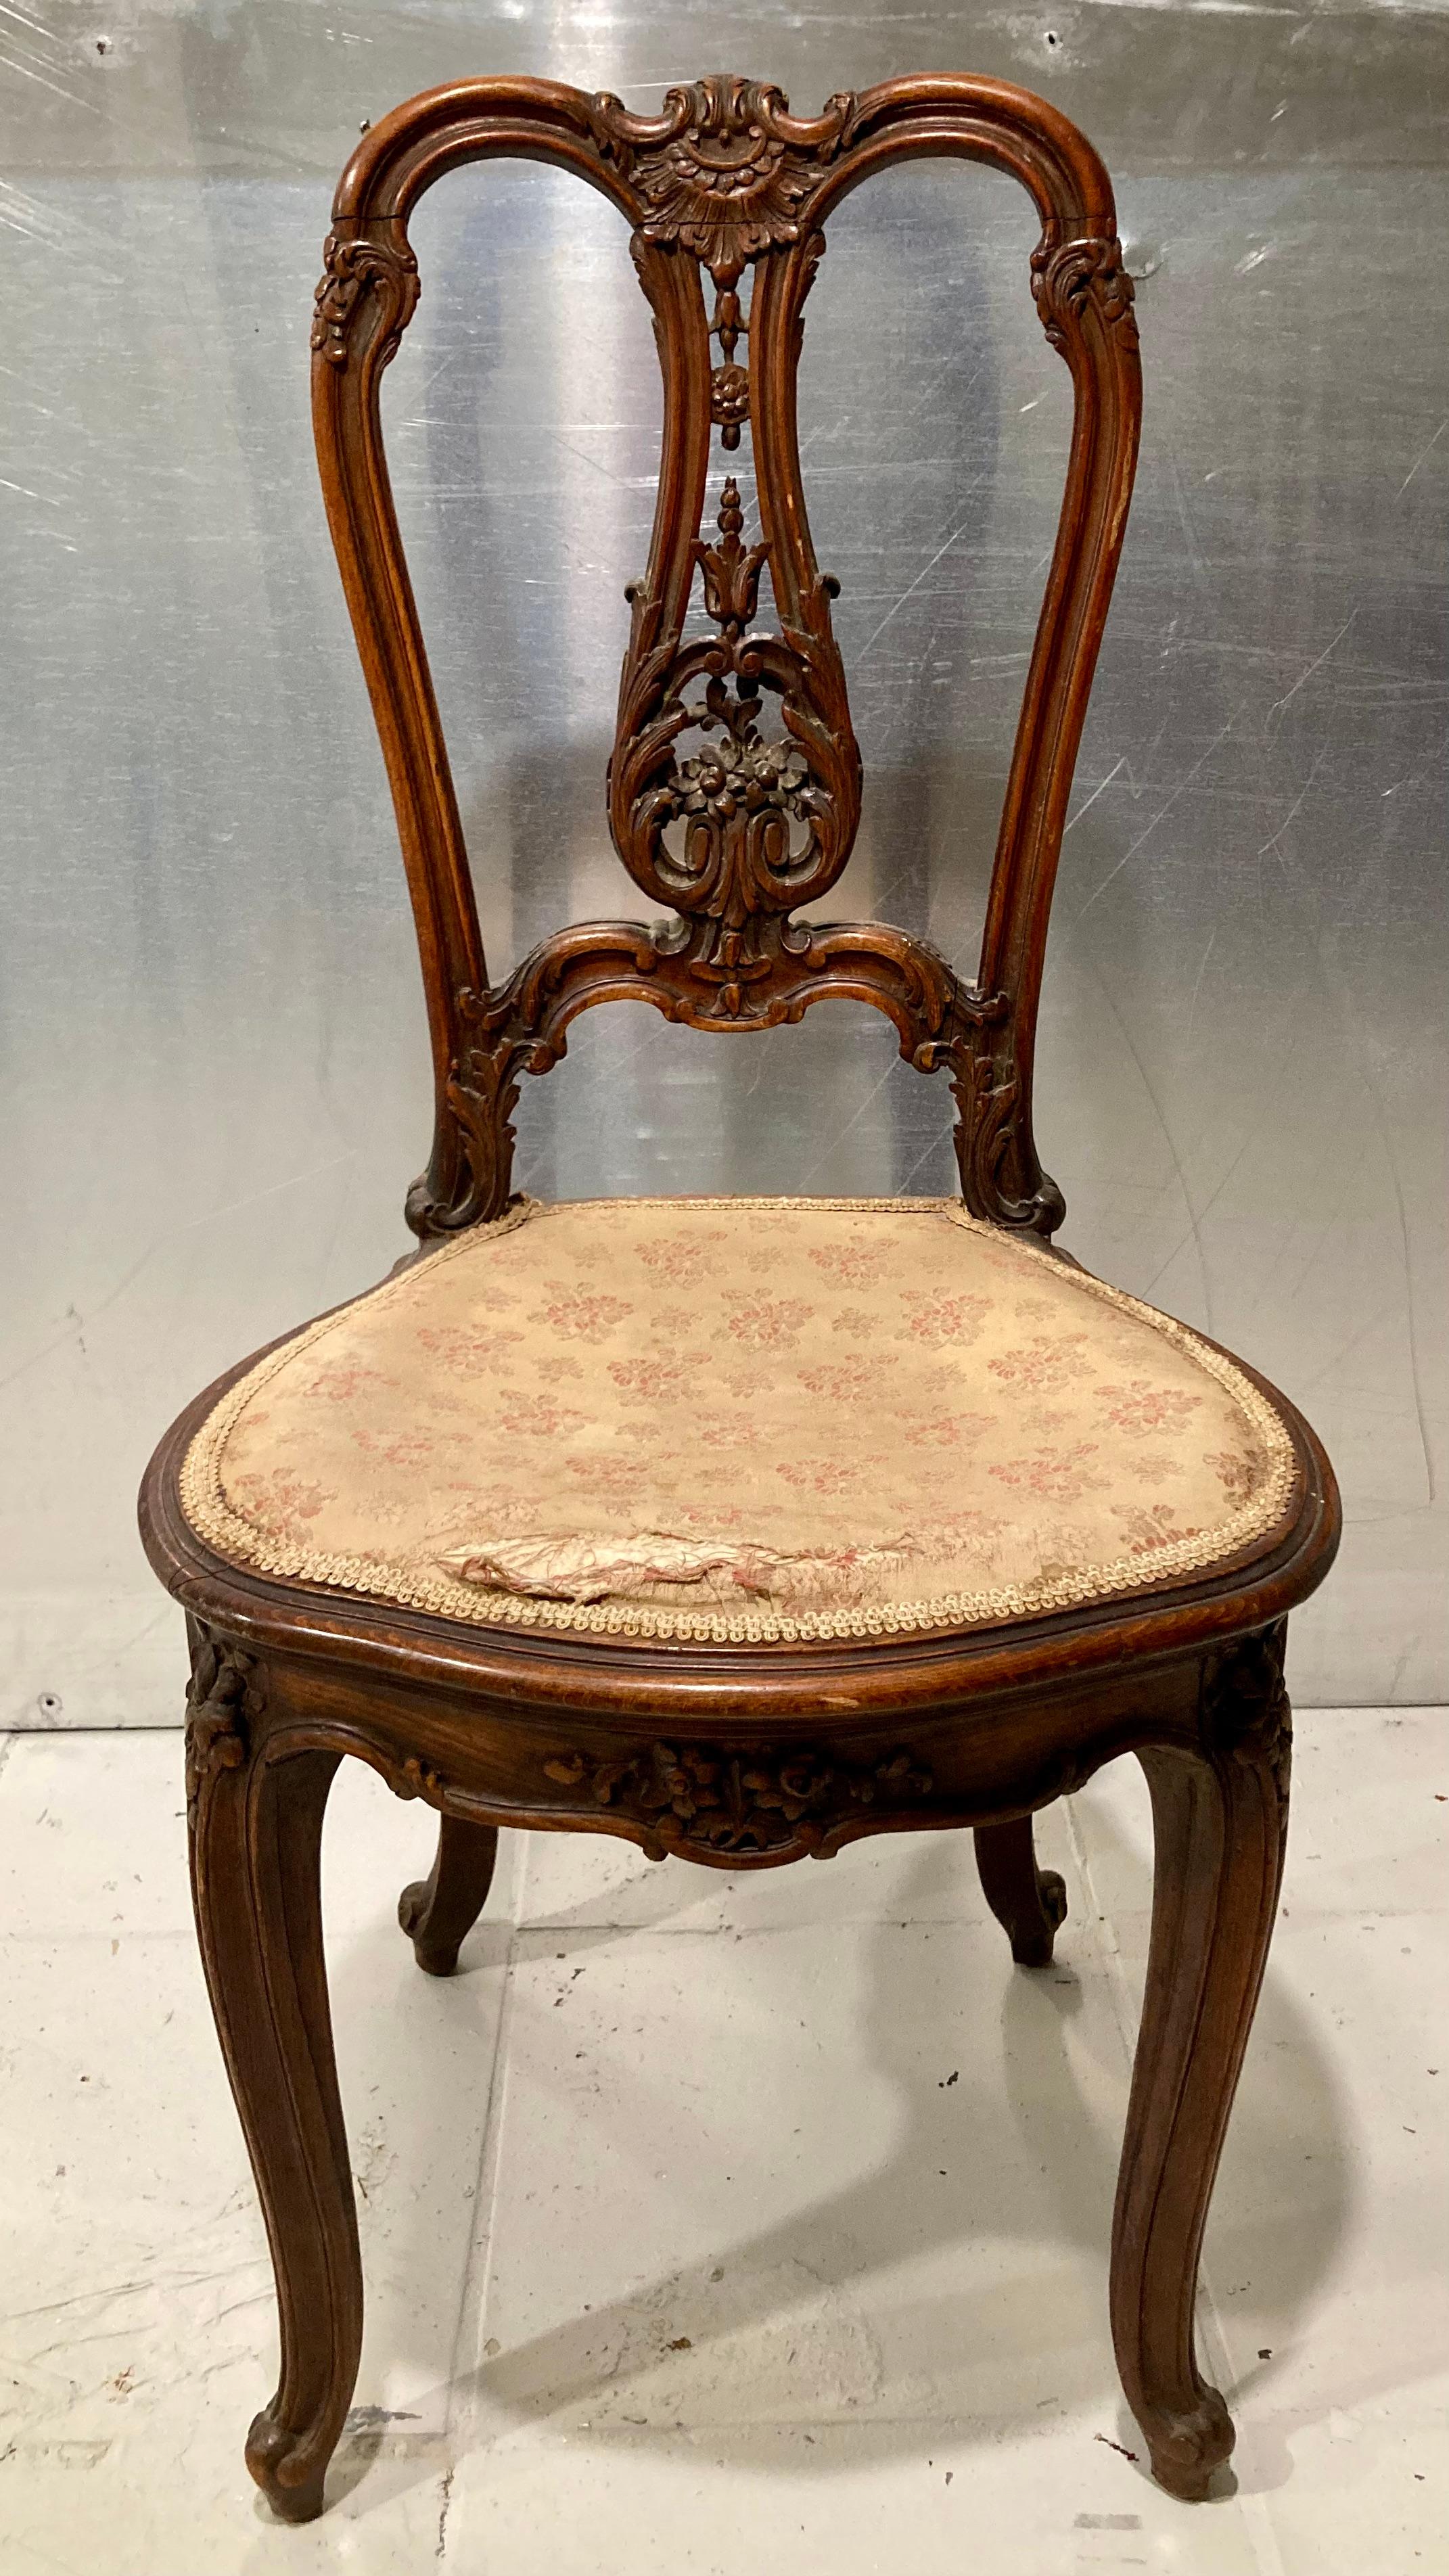 Beautiful French Louis XV desk chair. Original frame finish and cushion seat. Beautiful original finish on frame and can easily be recovered in your favorite fabric.